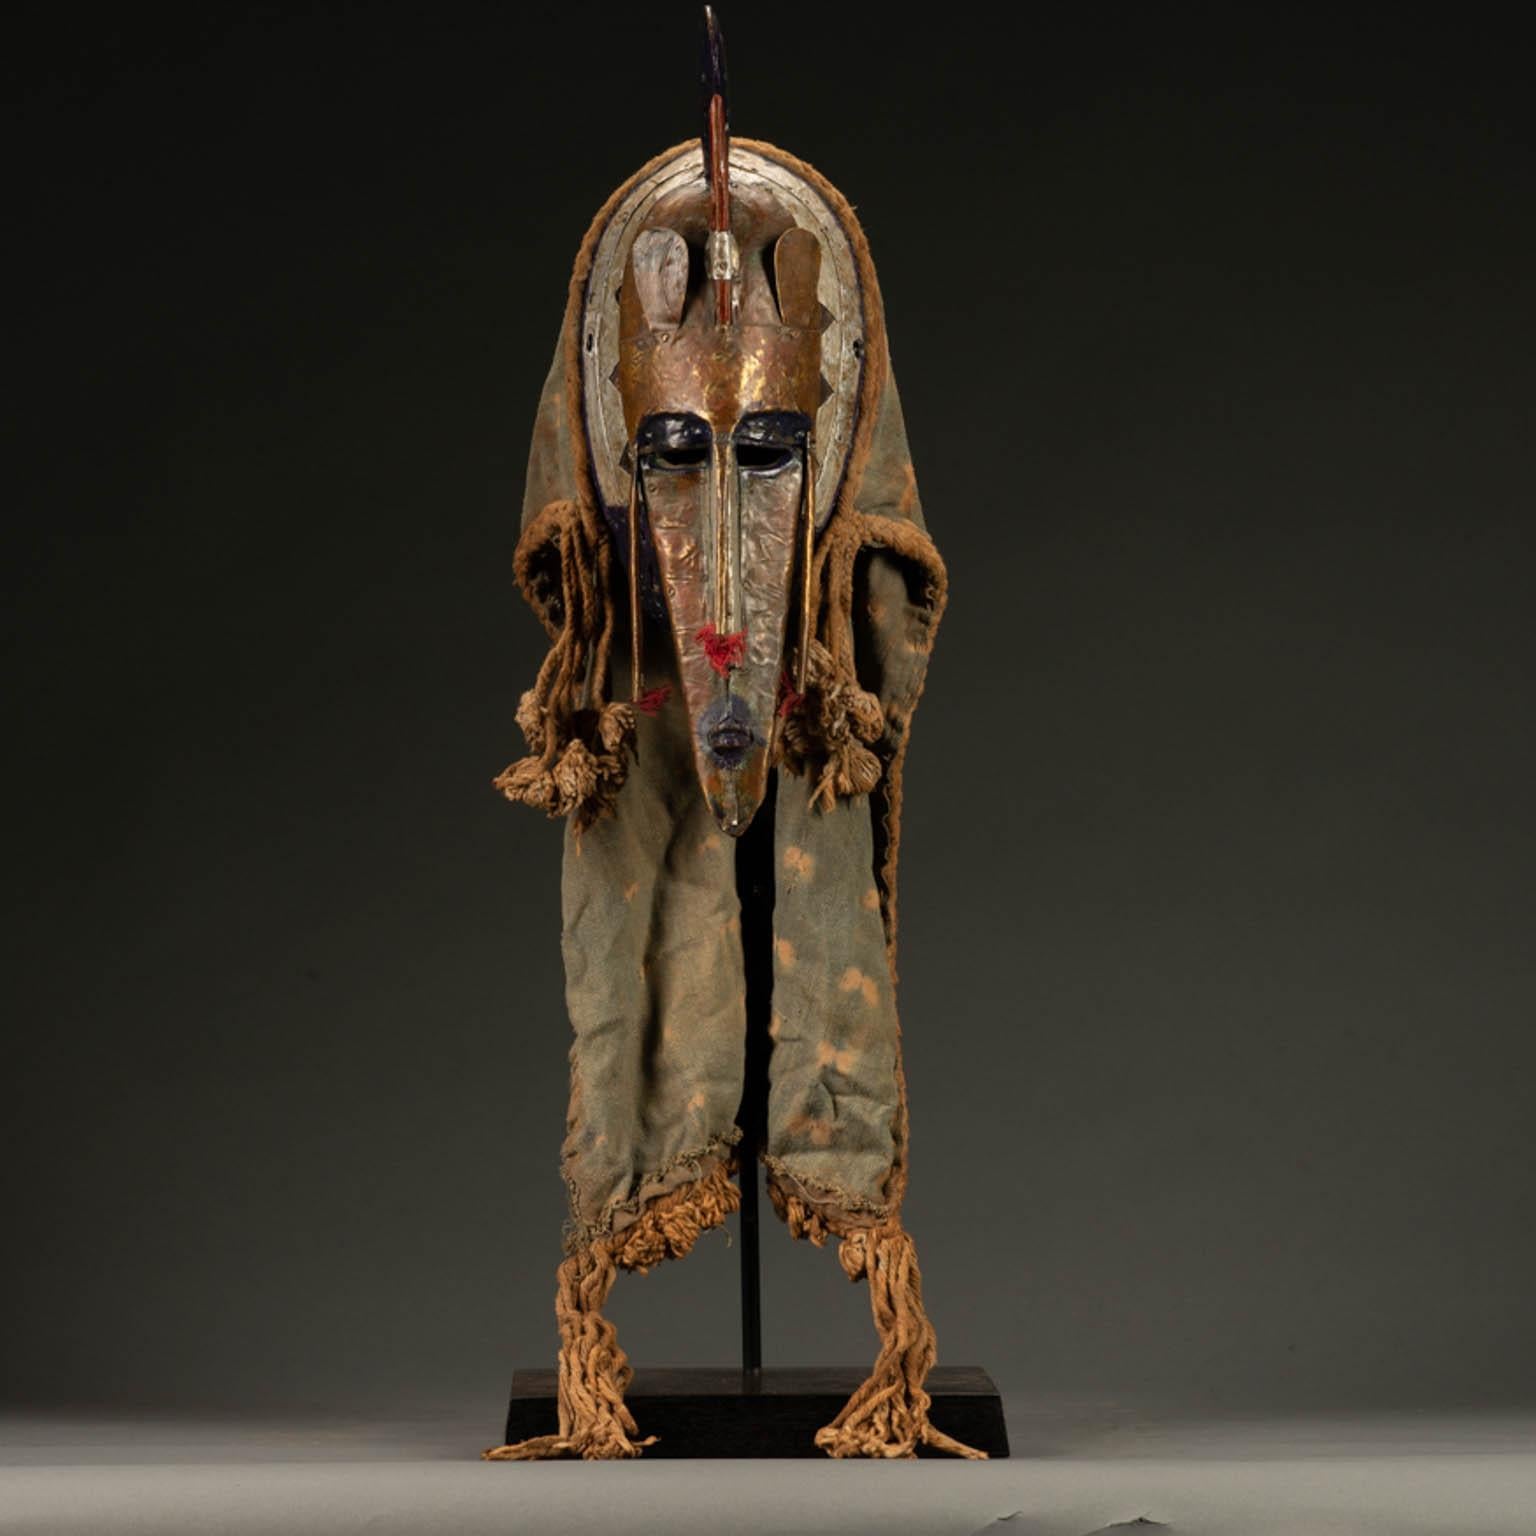  Marka Mask 

Mali 20th century wood, copper, cotton, & fiber 32 1/2 inches

Each piece of tribal art is hand carved, passed down from generation to generation, and is an aggregation of the history and the cultural experiences of the people and